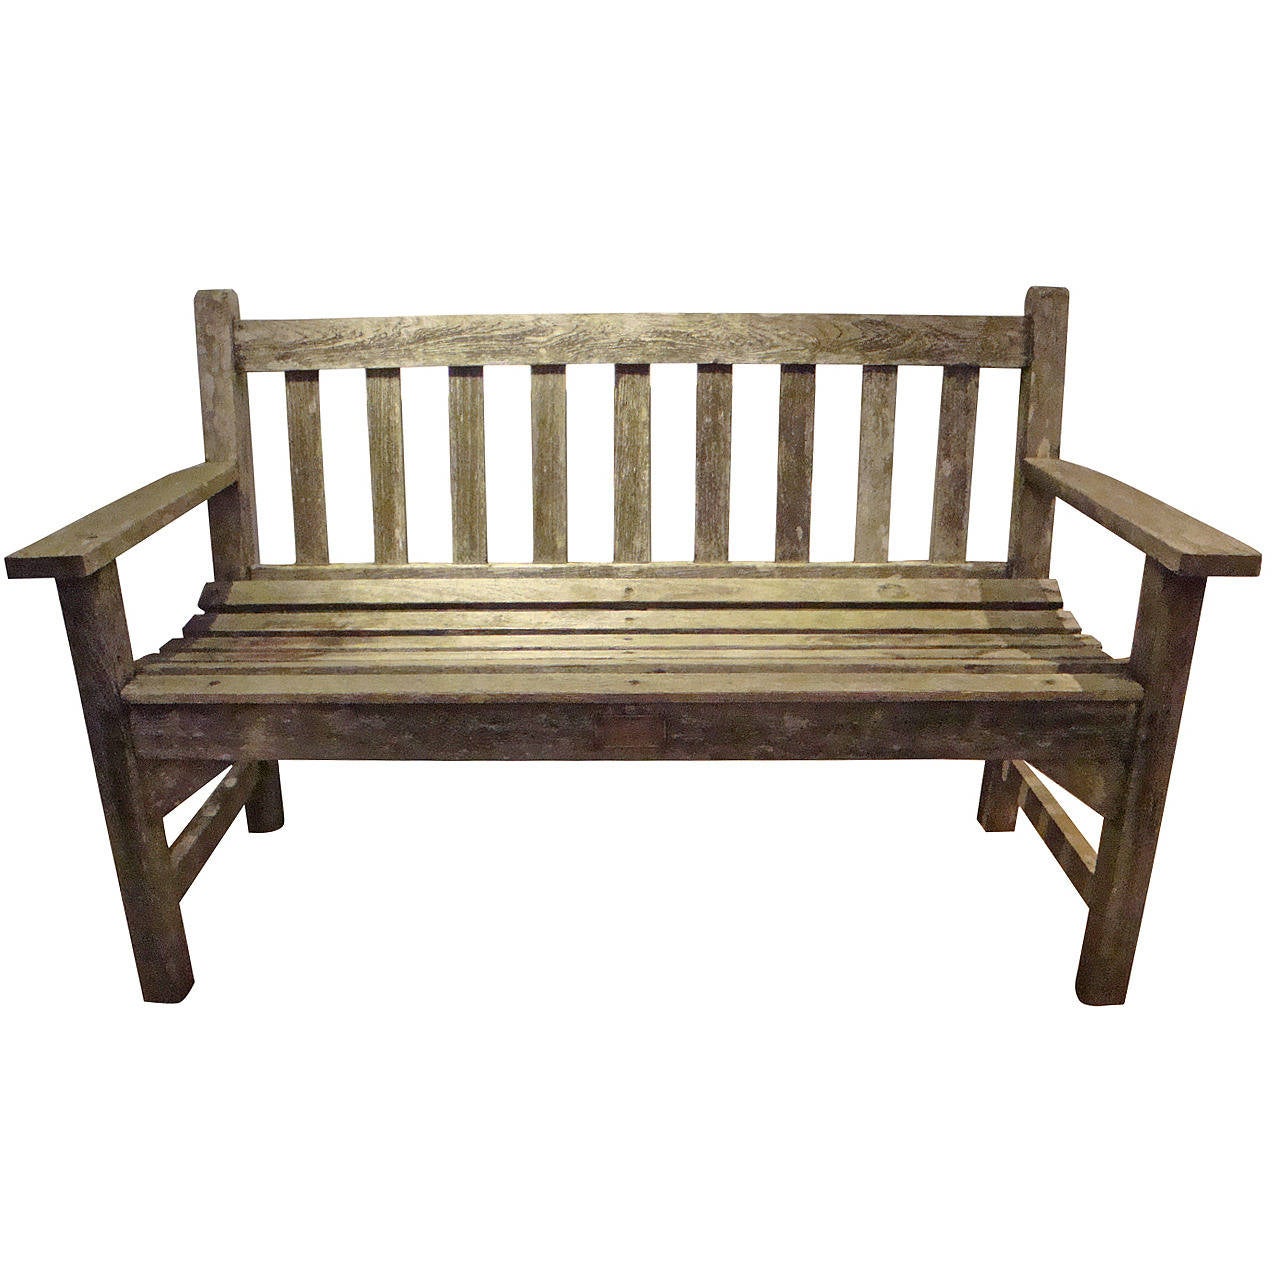 English Park Bench For Sale